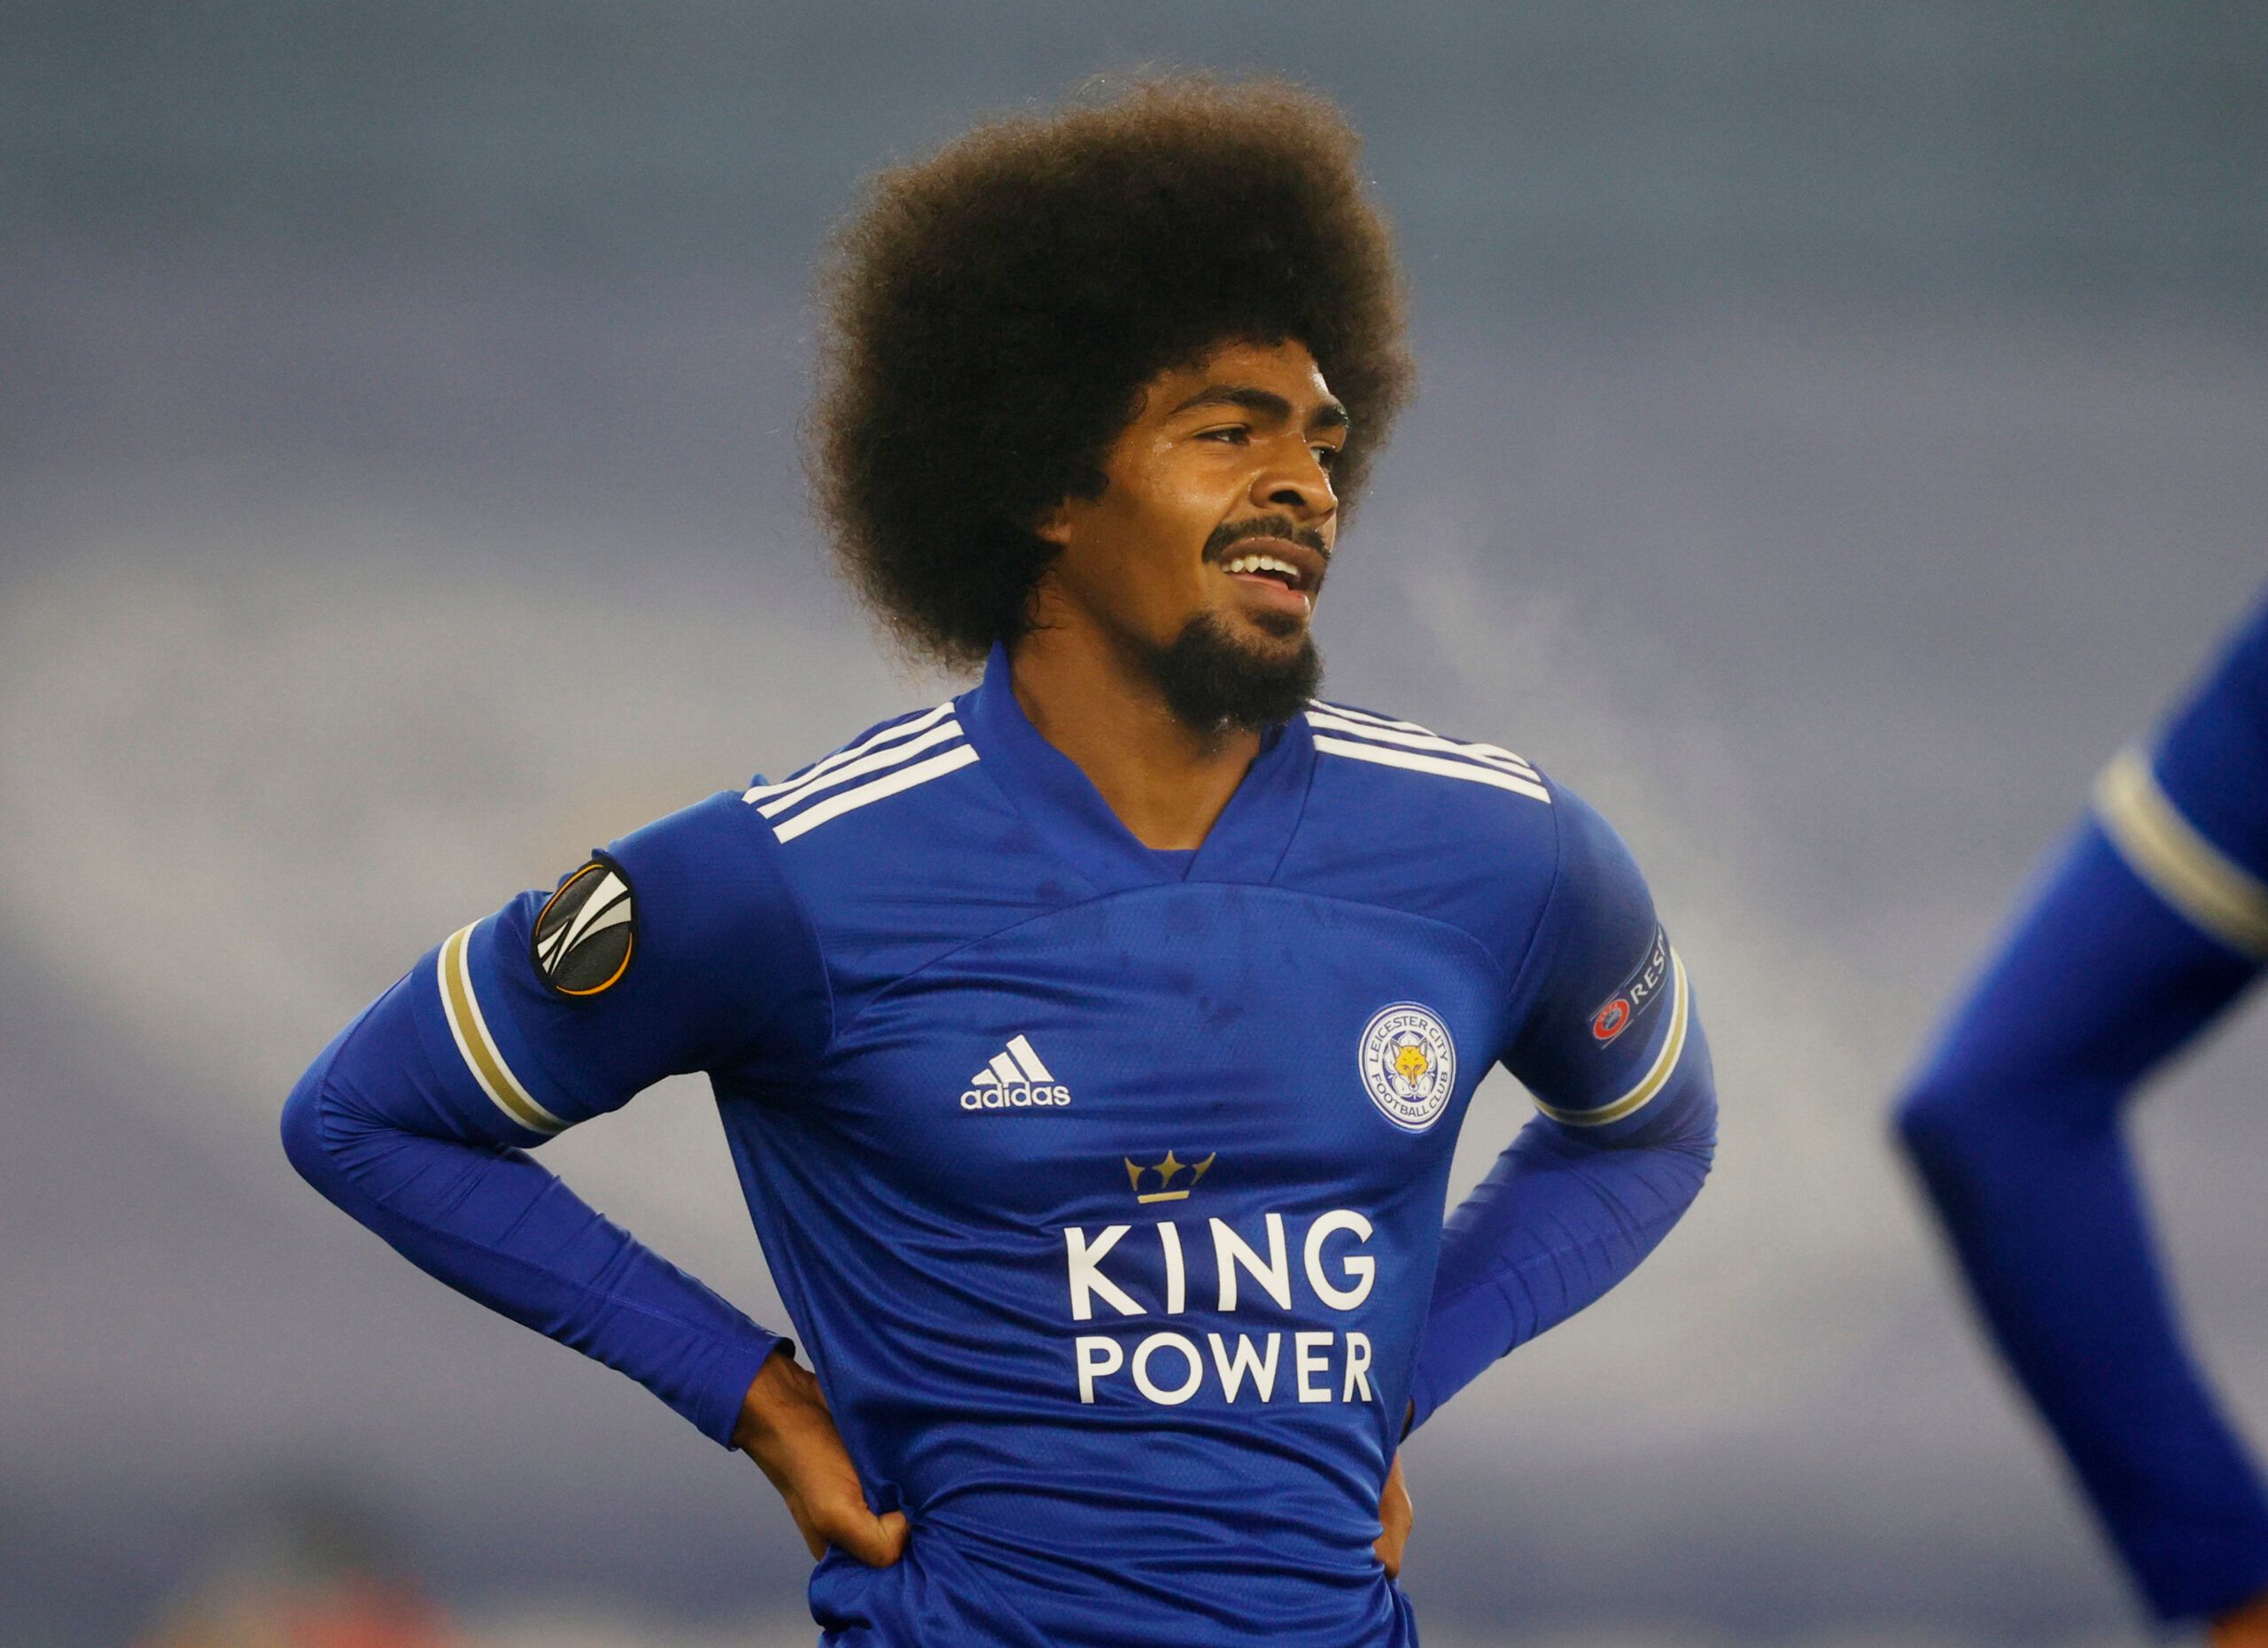 Soccer Football - Europa League - Group G - Leicester City v S.C. Braga - King Power Stadium, Leicester, Britain - November 5, 2020 Leicester City's Hamza Choudhury reacts REUTERS/Phil Noble